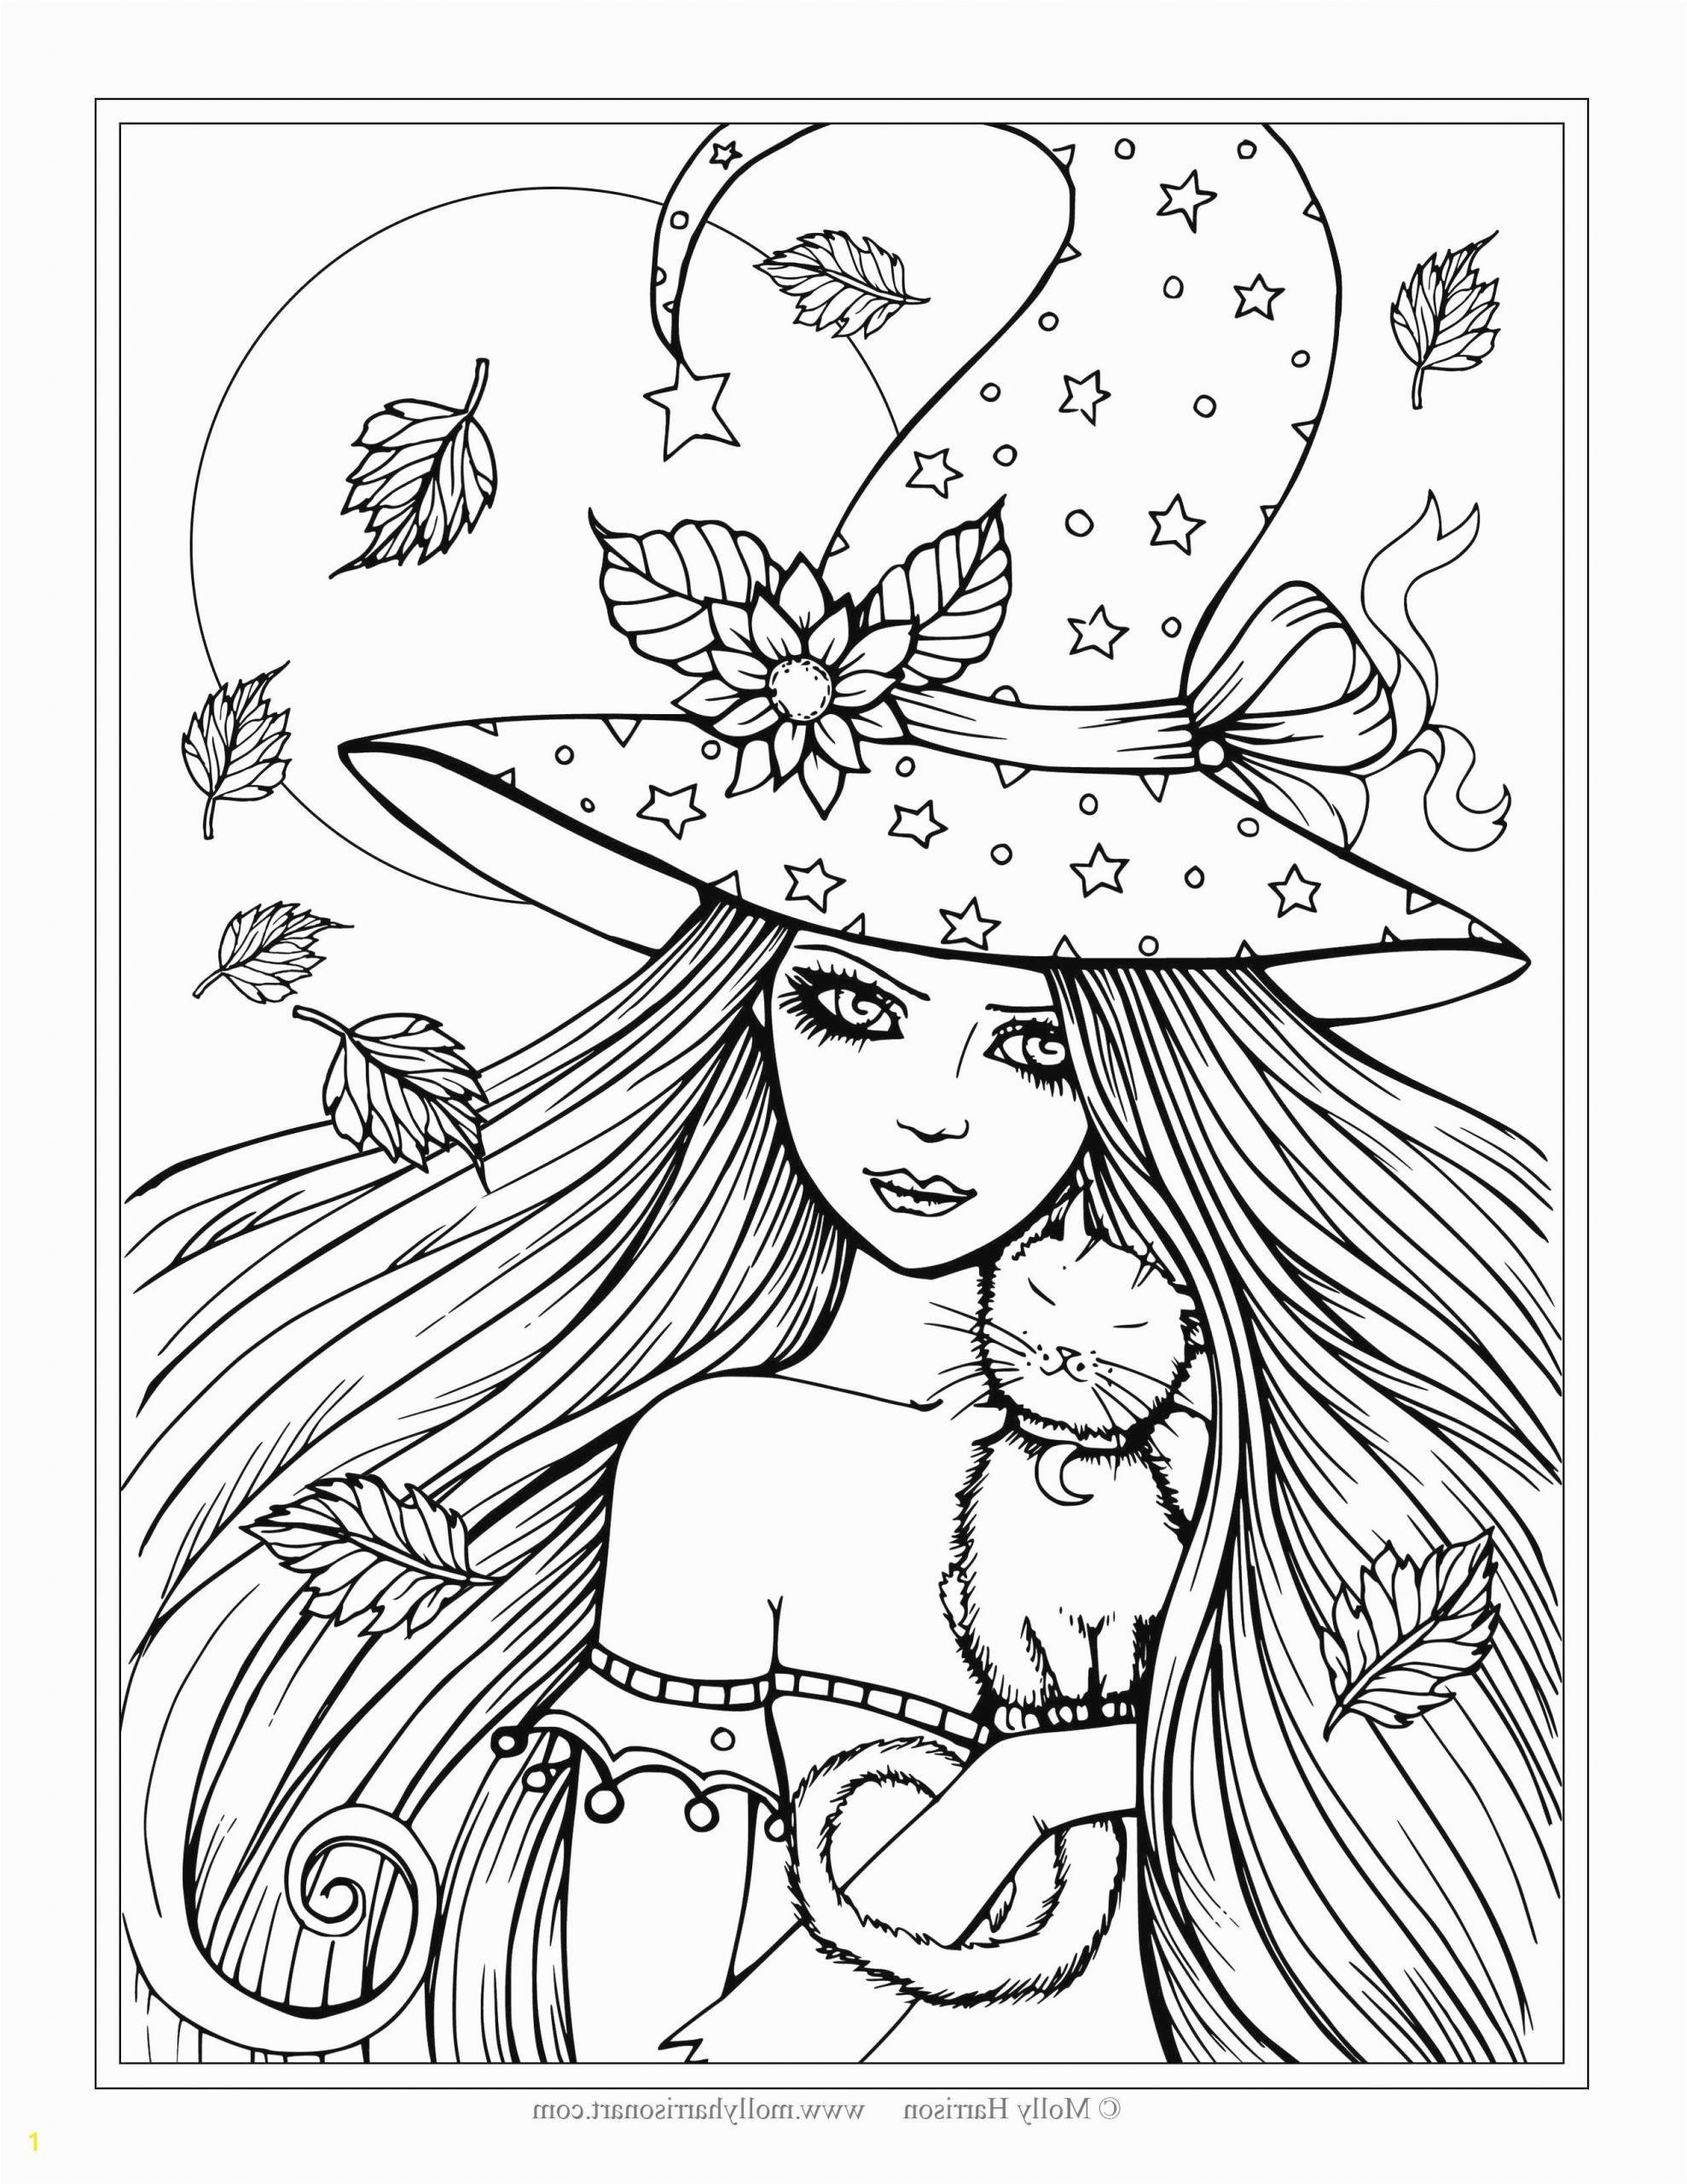 Witch Coloring Pages for Adults Valentines Free Coloring Page Beautiful Gallery Mario Color